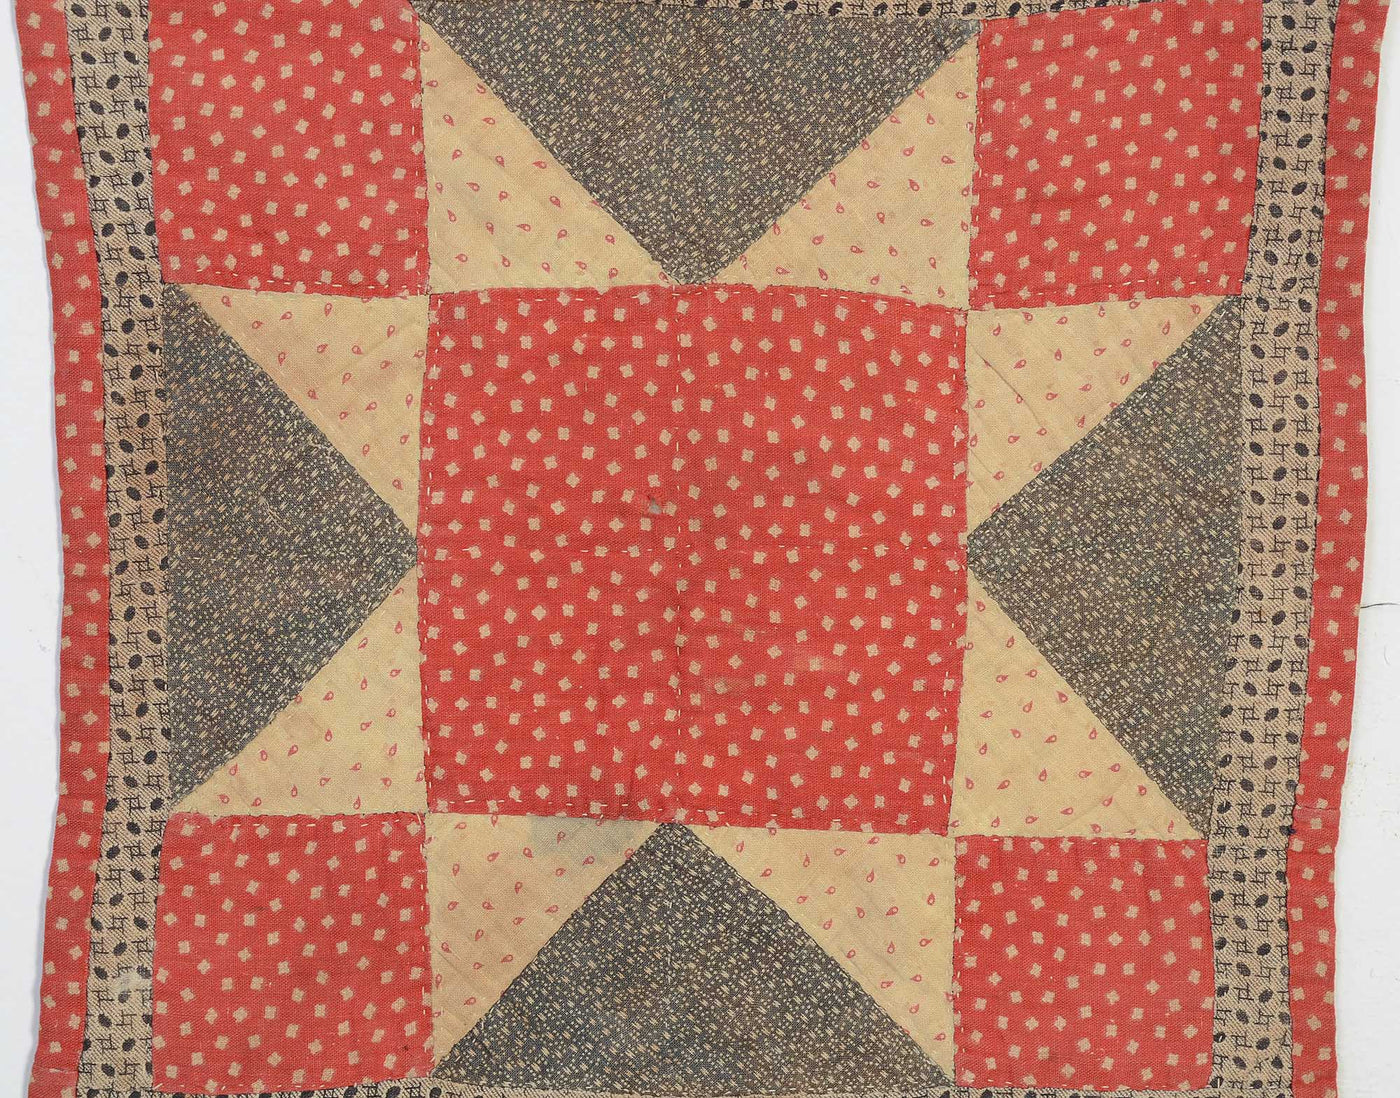 Center view of 19th century Evening Star Doll Quilt.